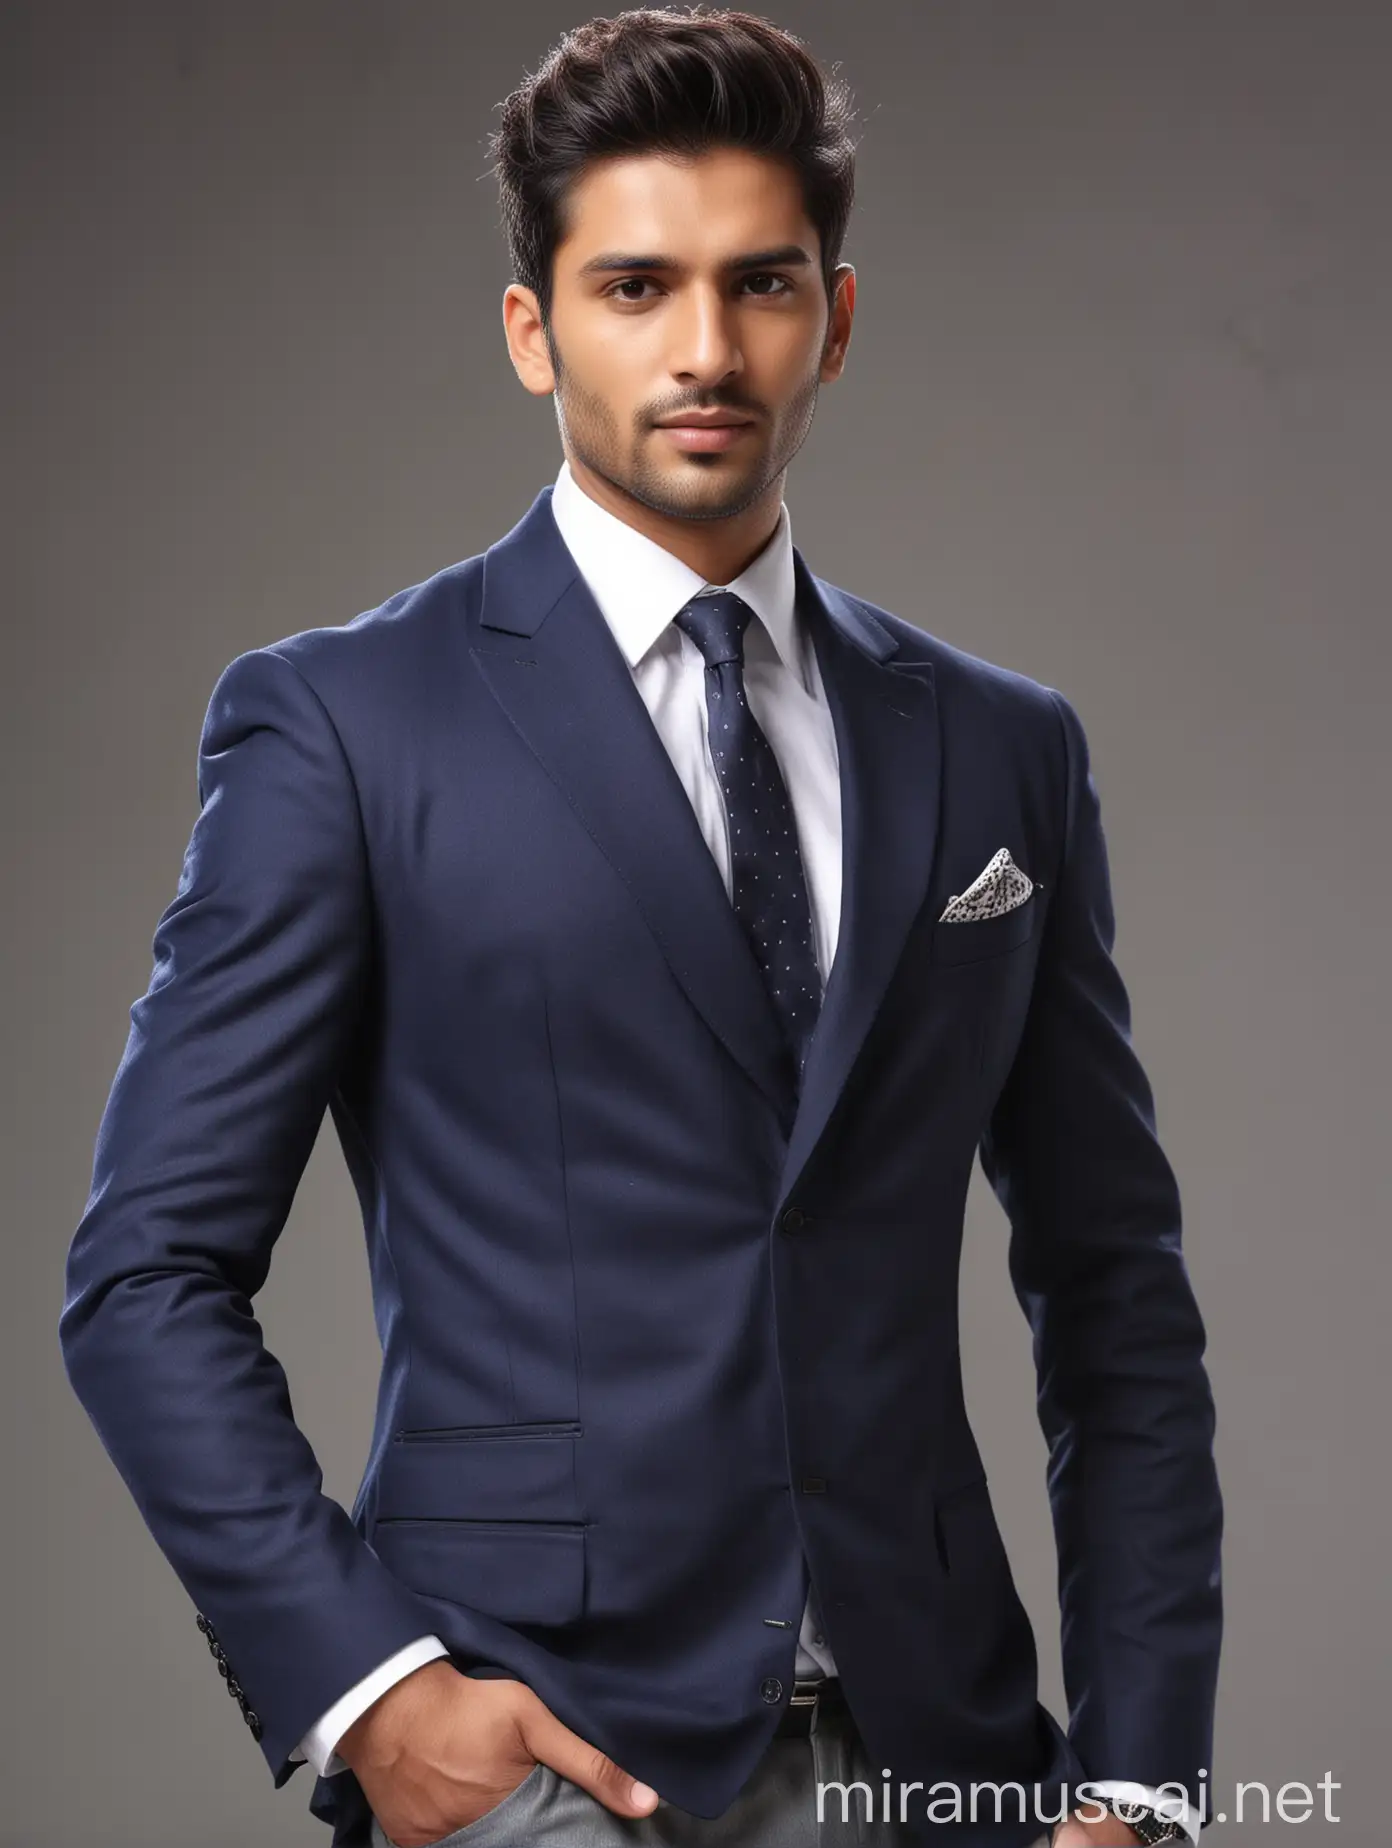 Stylish Handsome Indian Man in Elegant Suit High Definition Portrait Photography